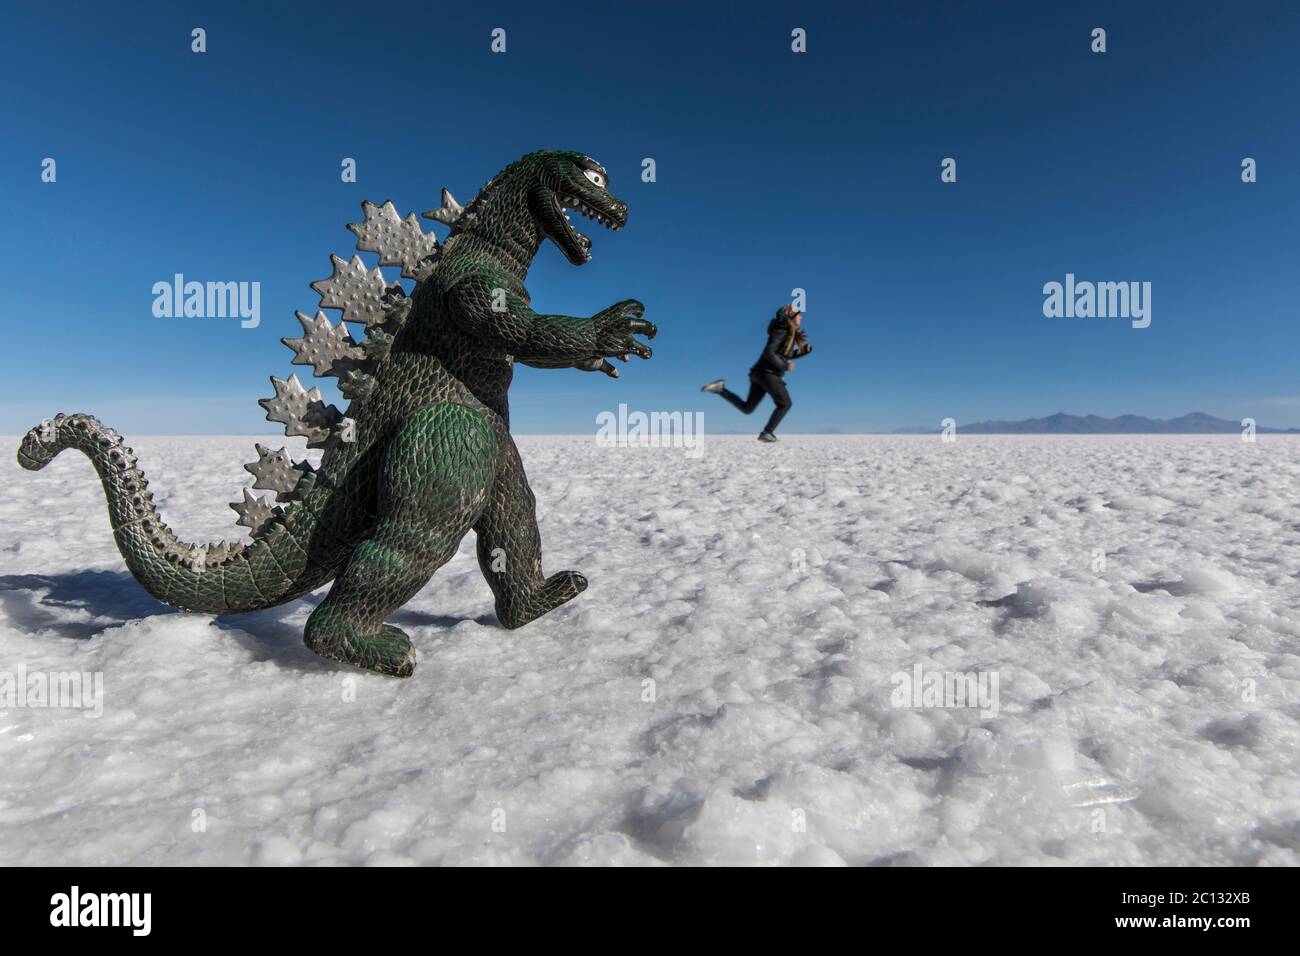 woman playing with perspective in salt flats escaping from a dinosaur Stock Photo